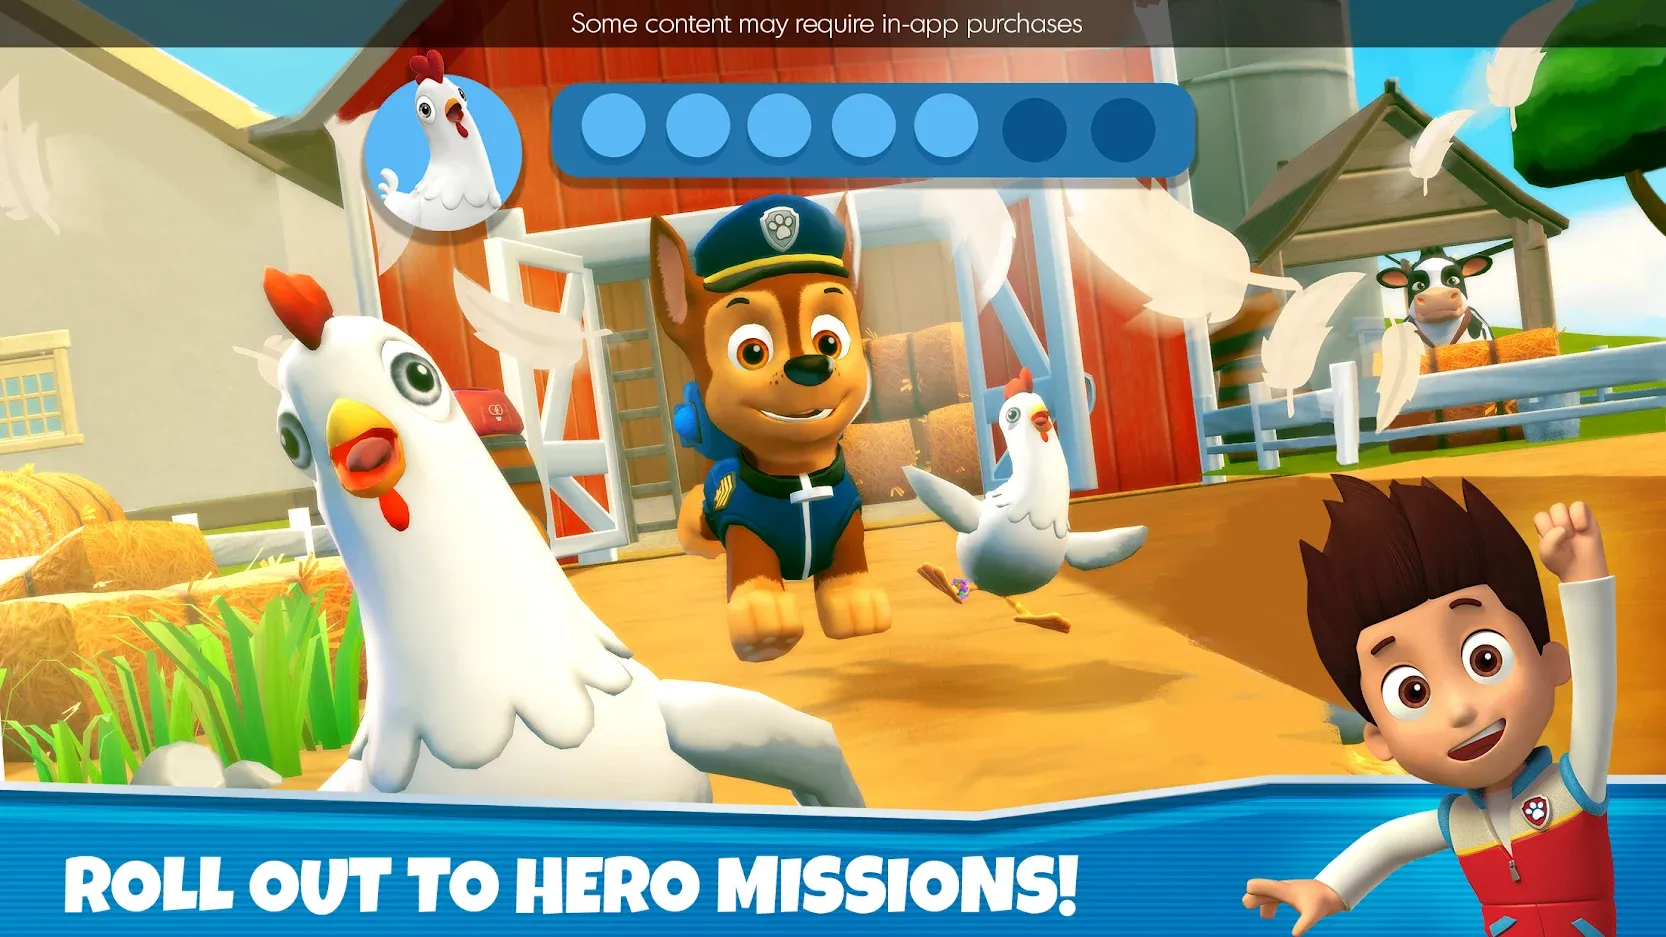 spids rack Sky Download PAW Patrol Rescue World 2021.6.0 MOD APK for android free